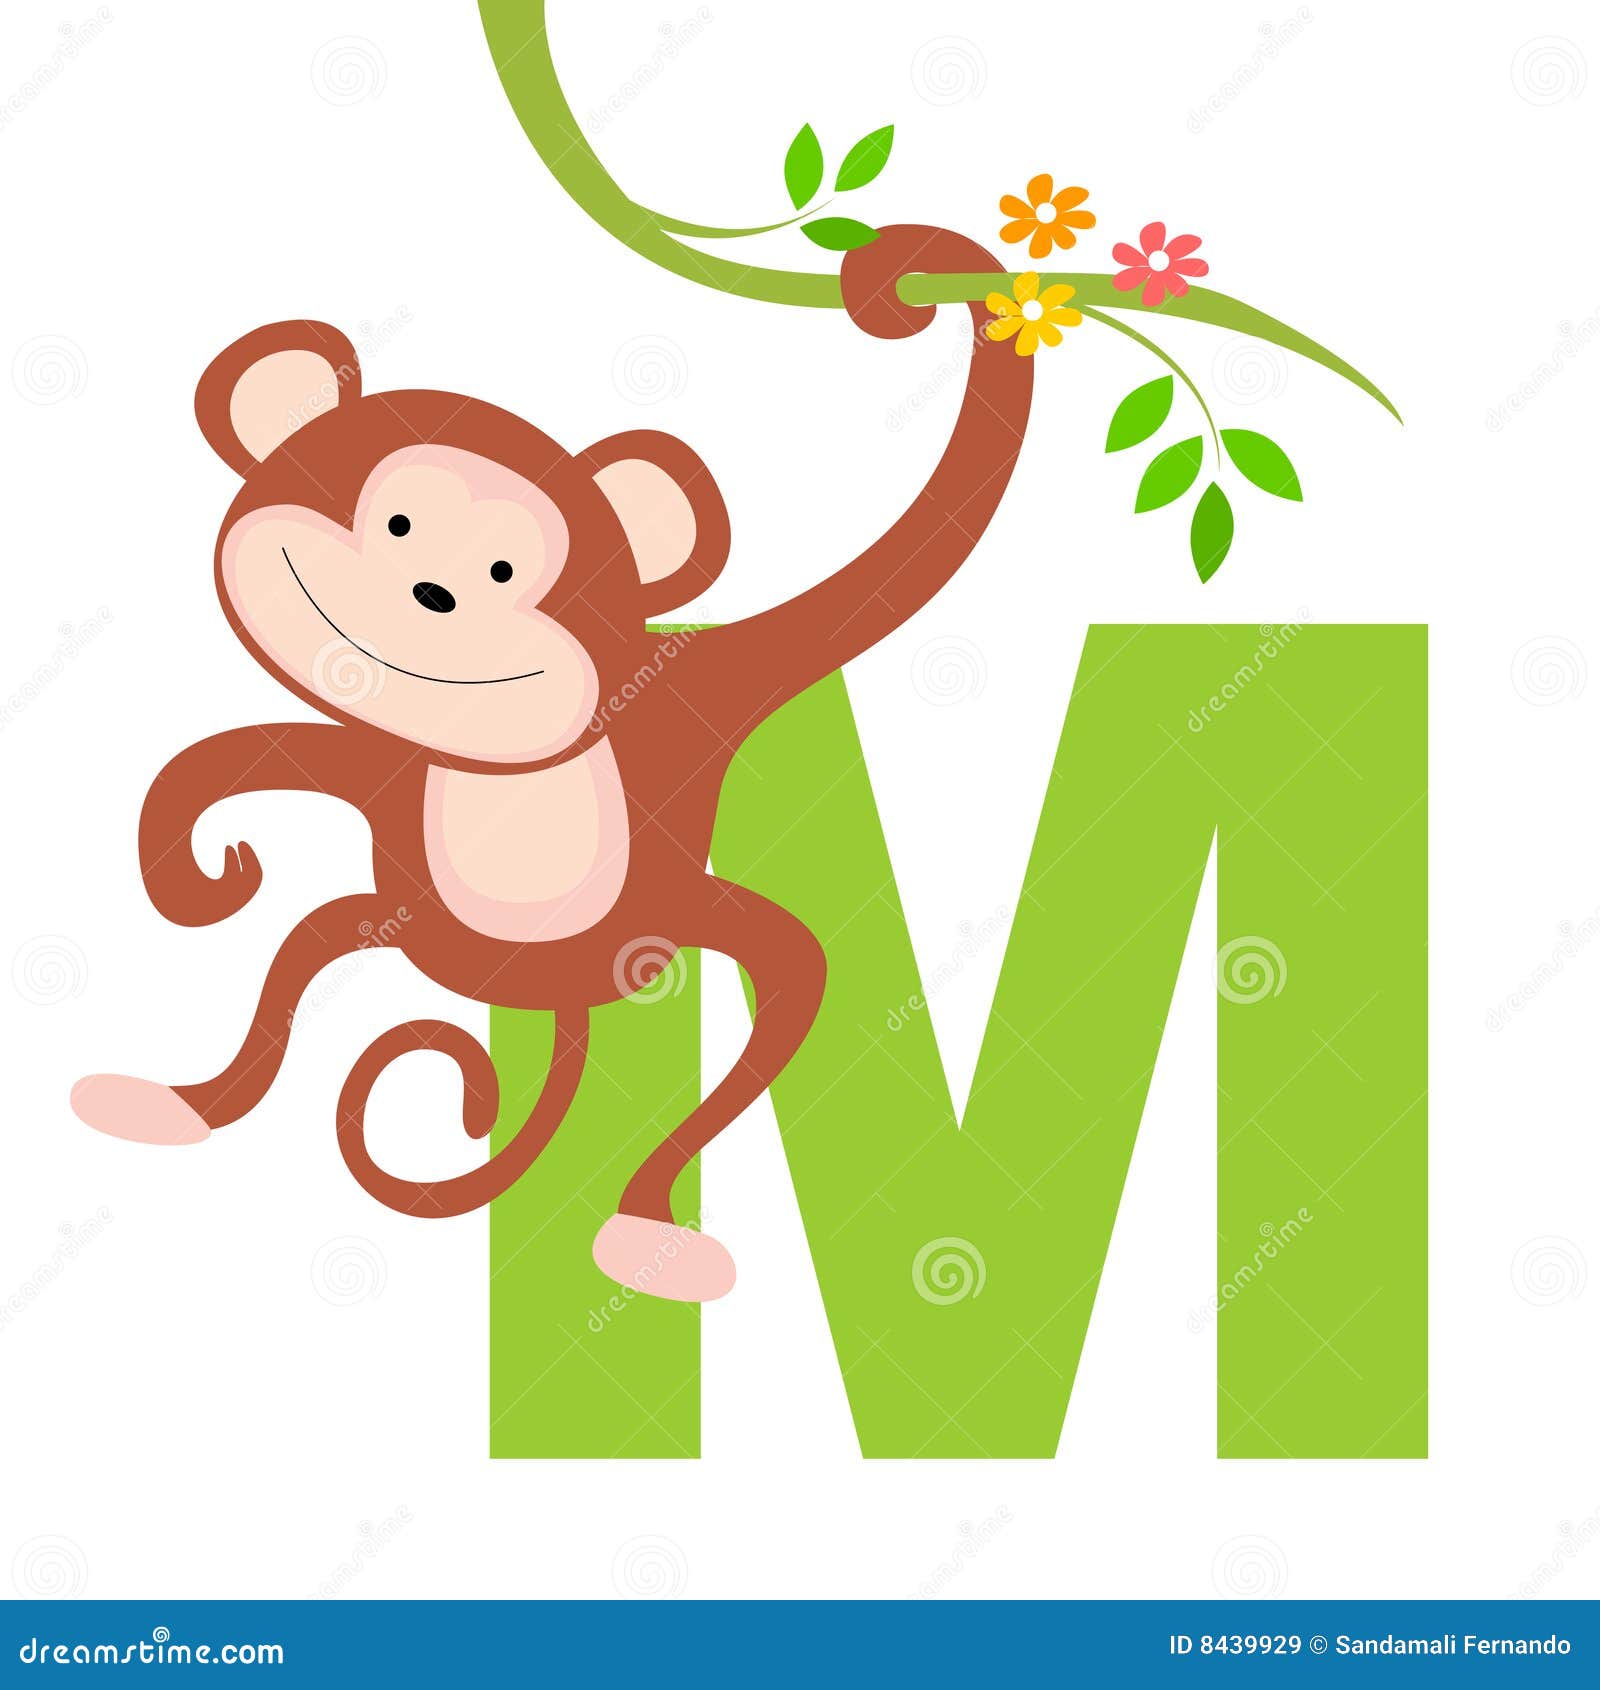 animal letters clipart - photo #29